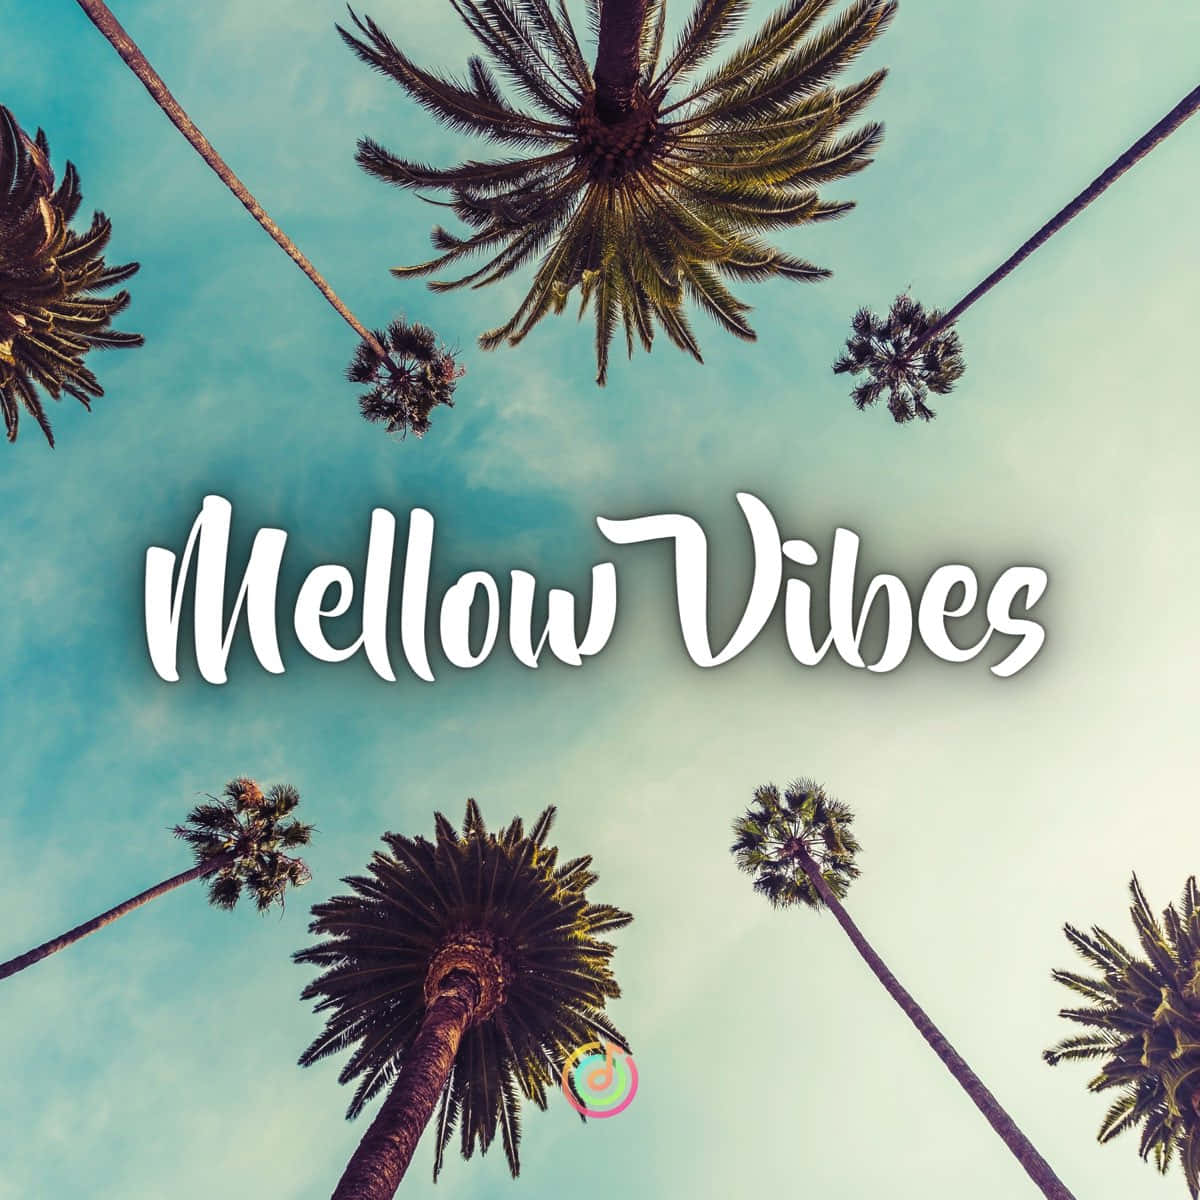 Mellow Vibes And Palm Trees Wallpaper